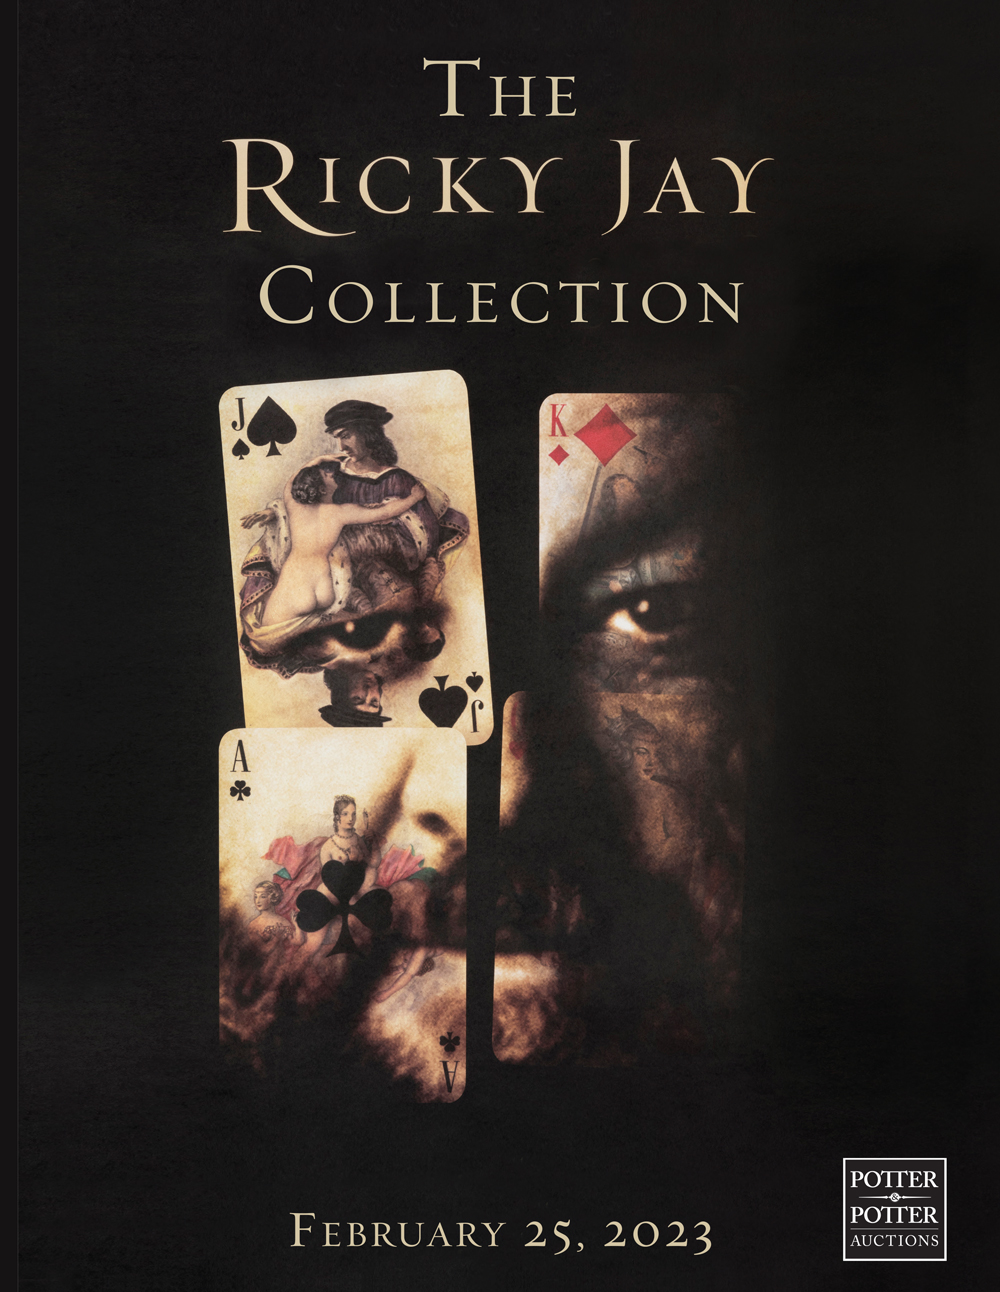 The Ricky Jay Collection Auction Preview & Reception